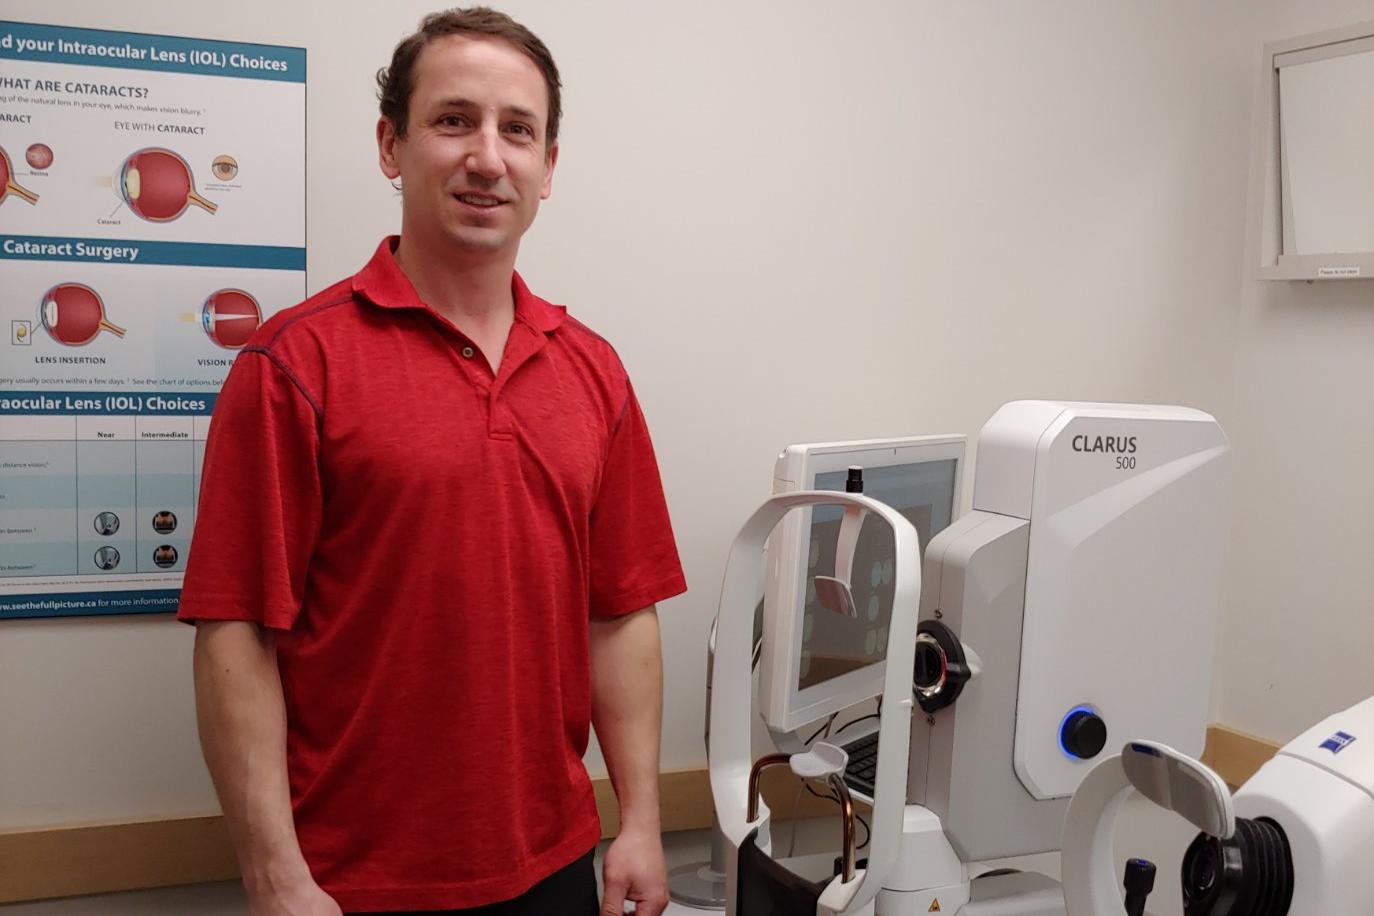 Dr. Brian Nelson and the CLARUS 500